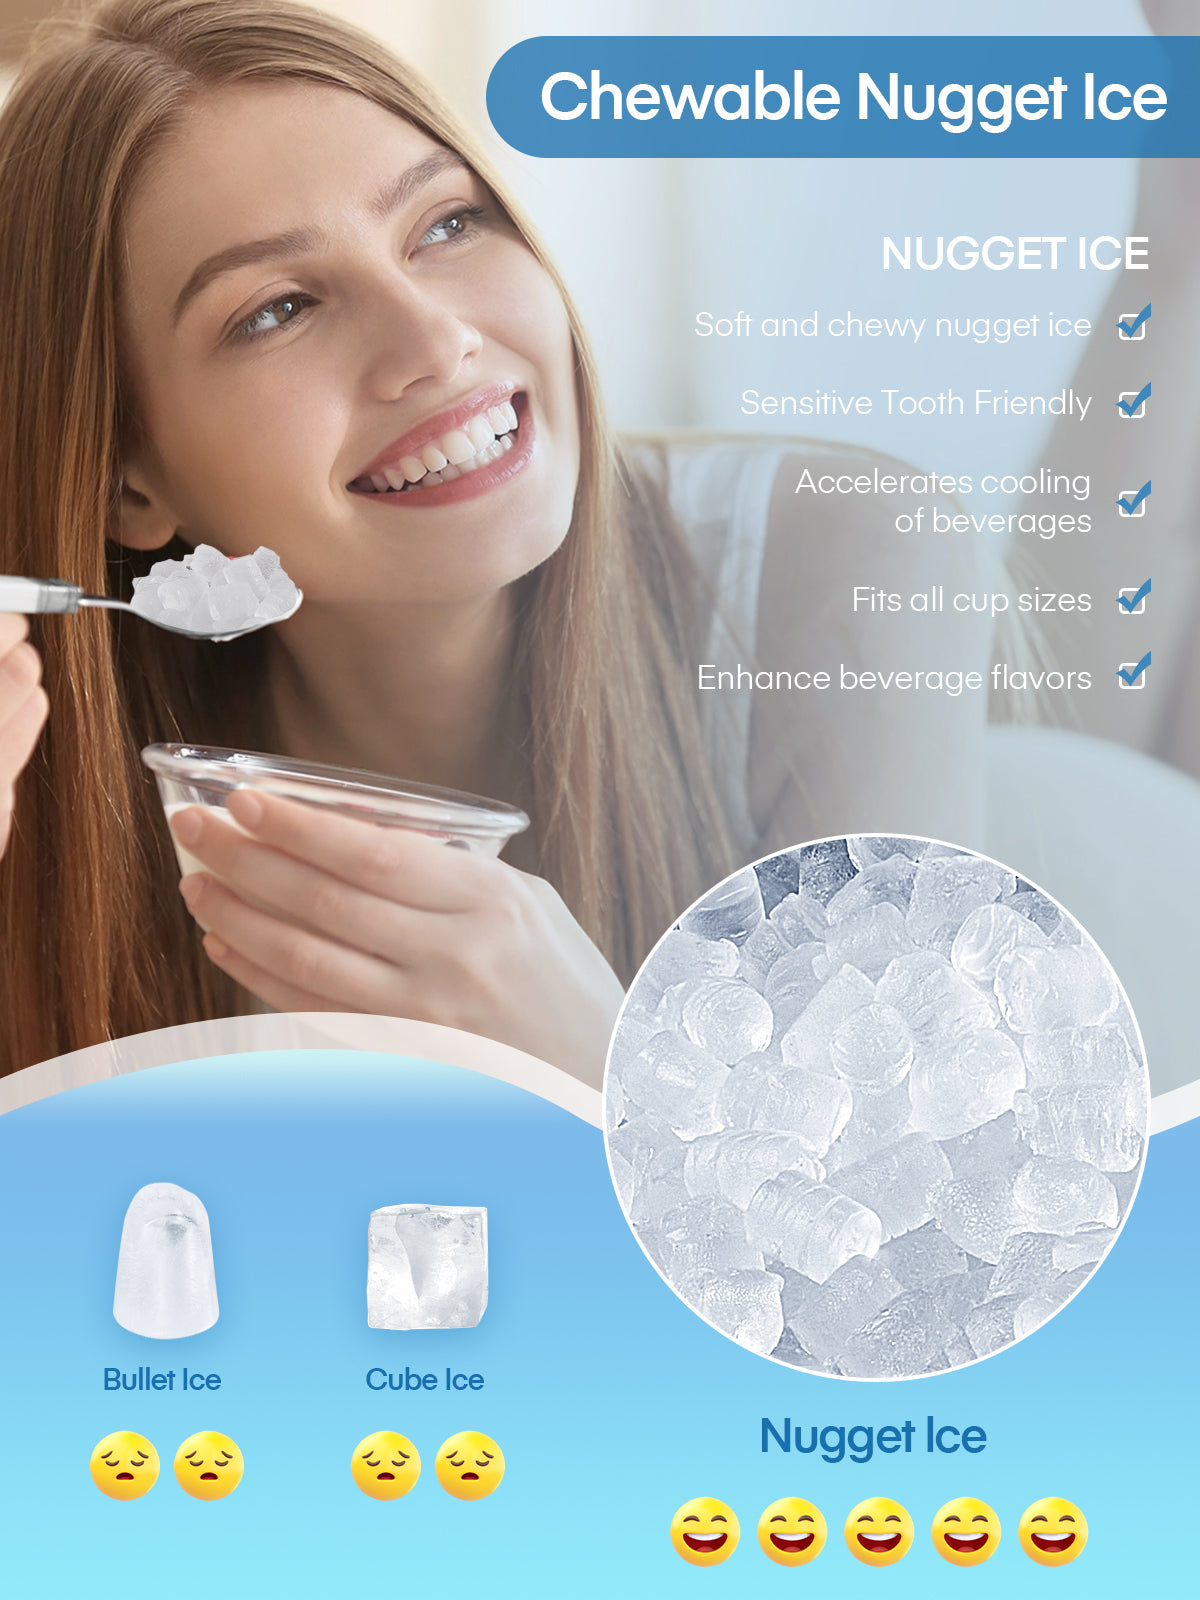 FOHERE Nugget Ice Maker Countertop, 38 Lbs In 24Hrs, Chewable Pellet Ice Cubes, Self-Cleaning Ice Machine, Stainless Steel Housing, Portable Ice Maker Machine With Ice Scoop & Basket For Home/Kitchen